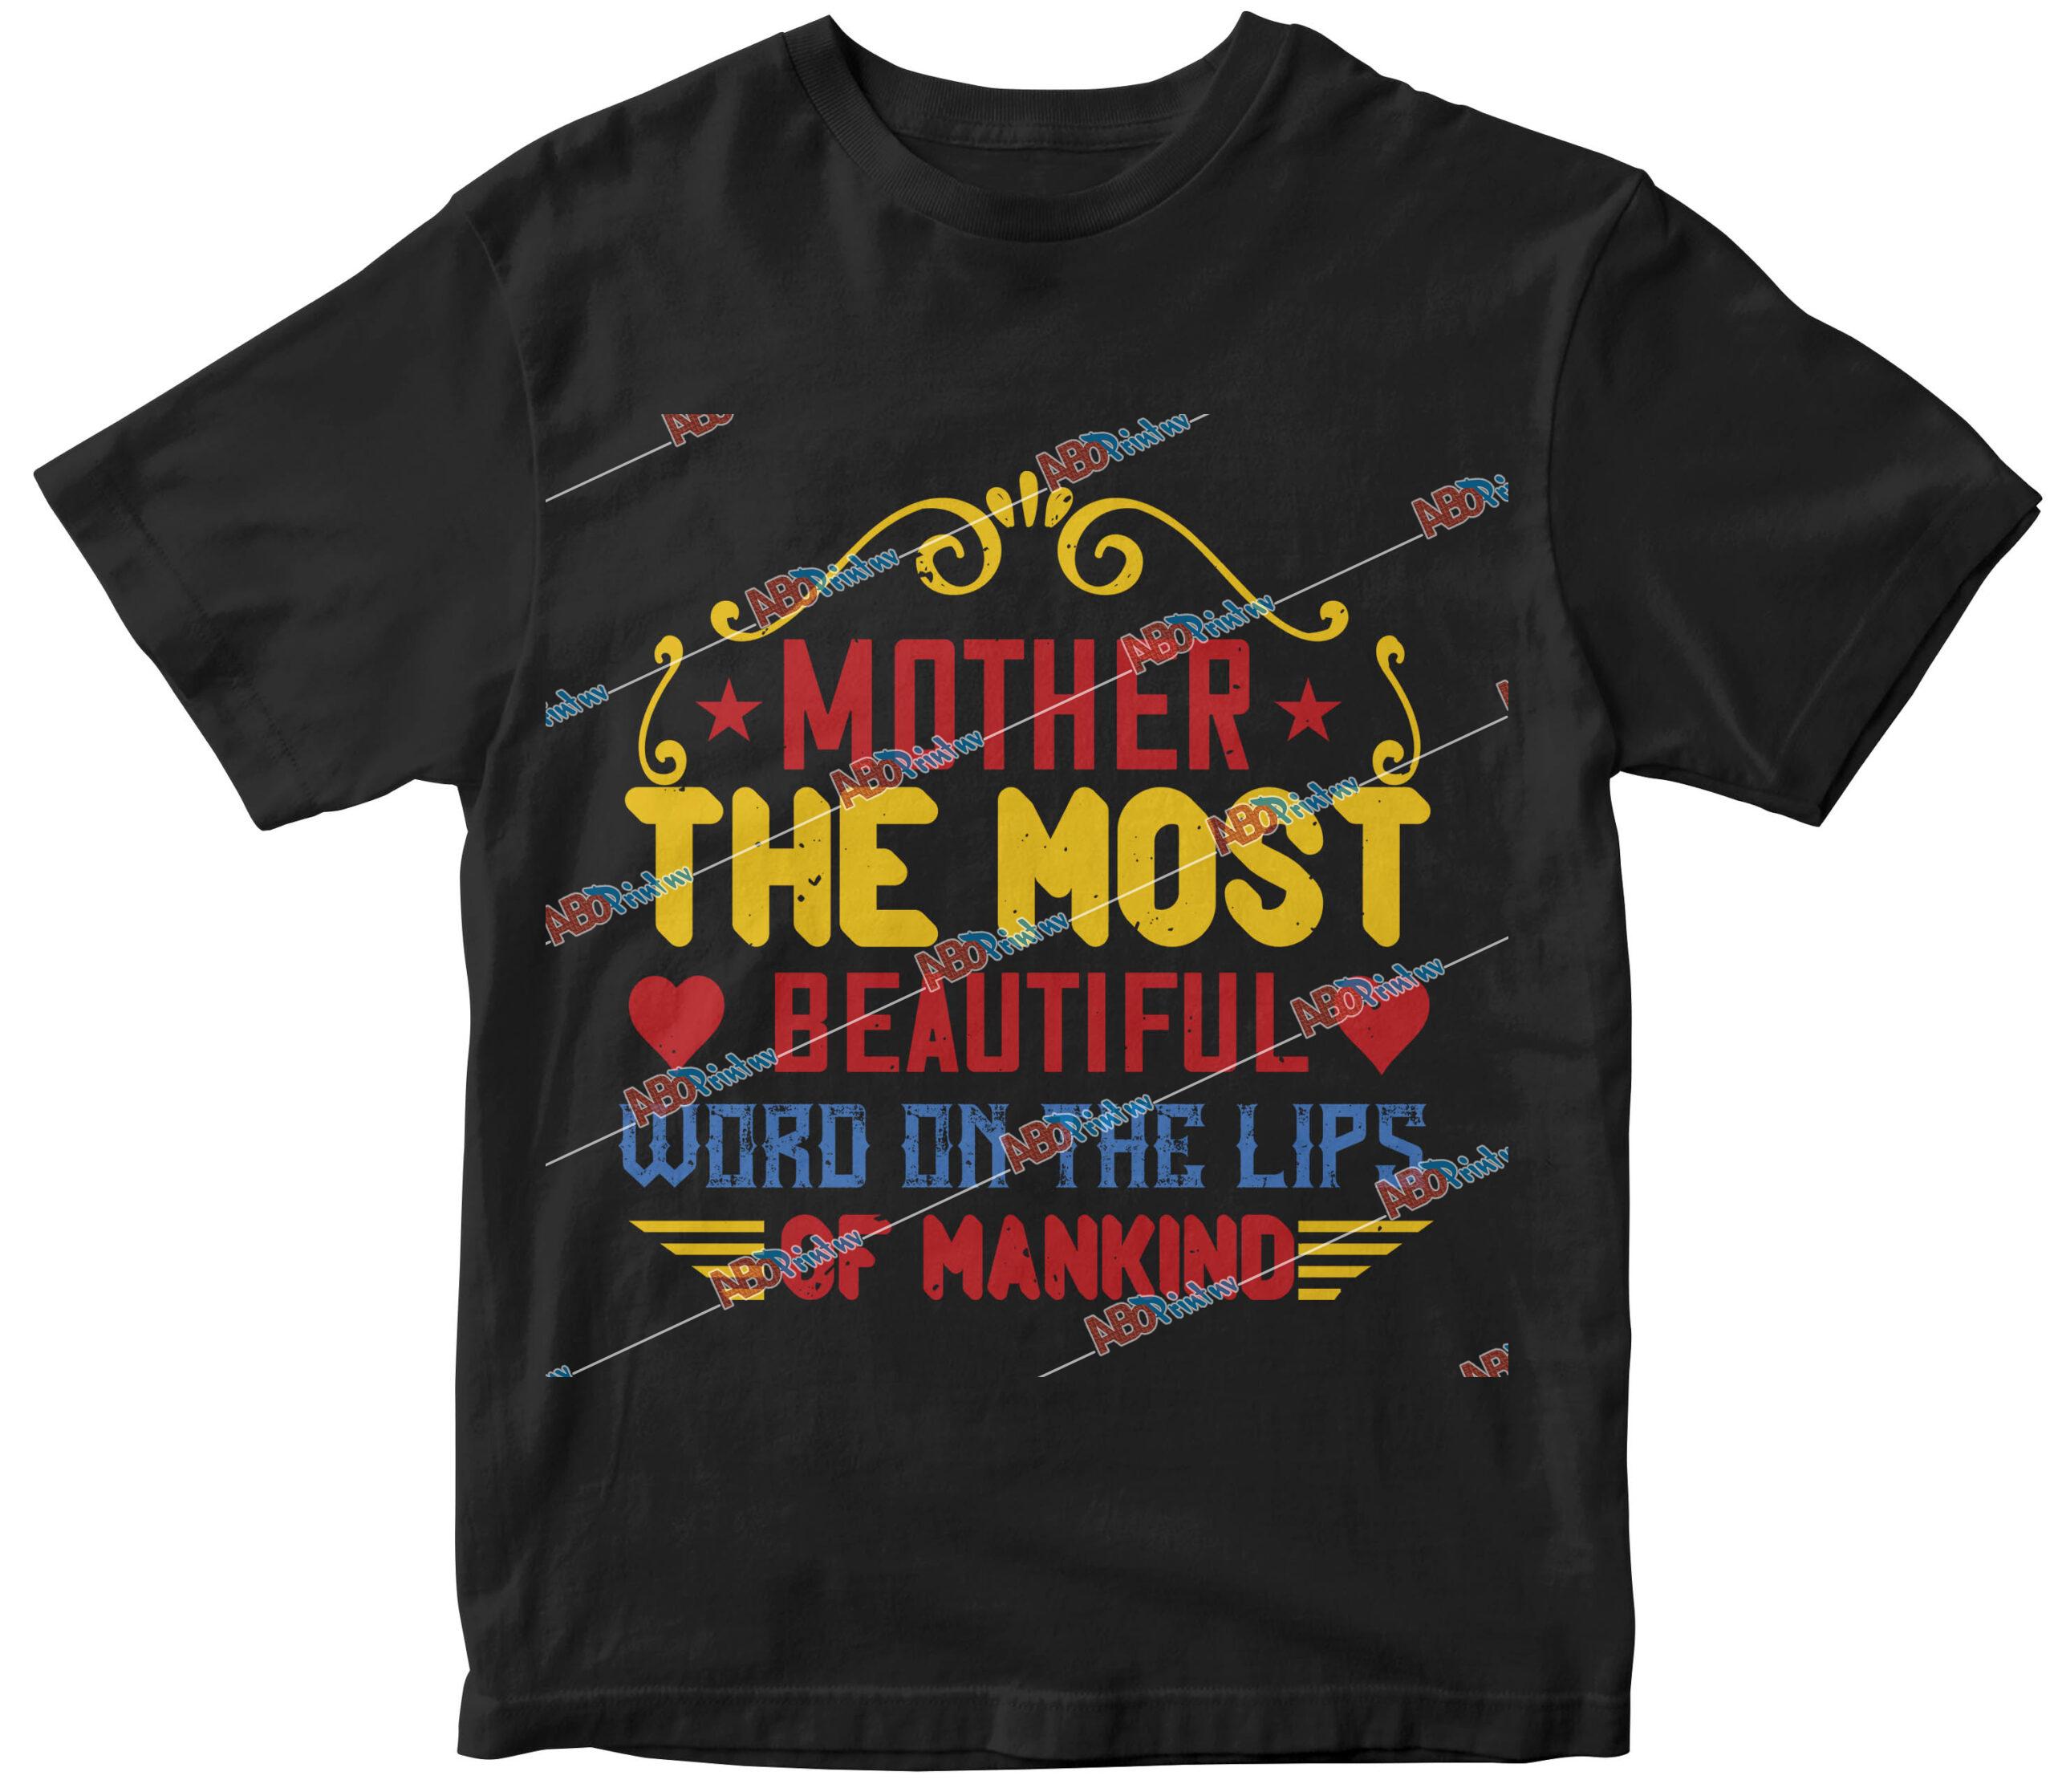 Mother the most beautiful word on the lips of mankind.jpg